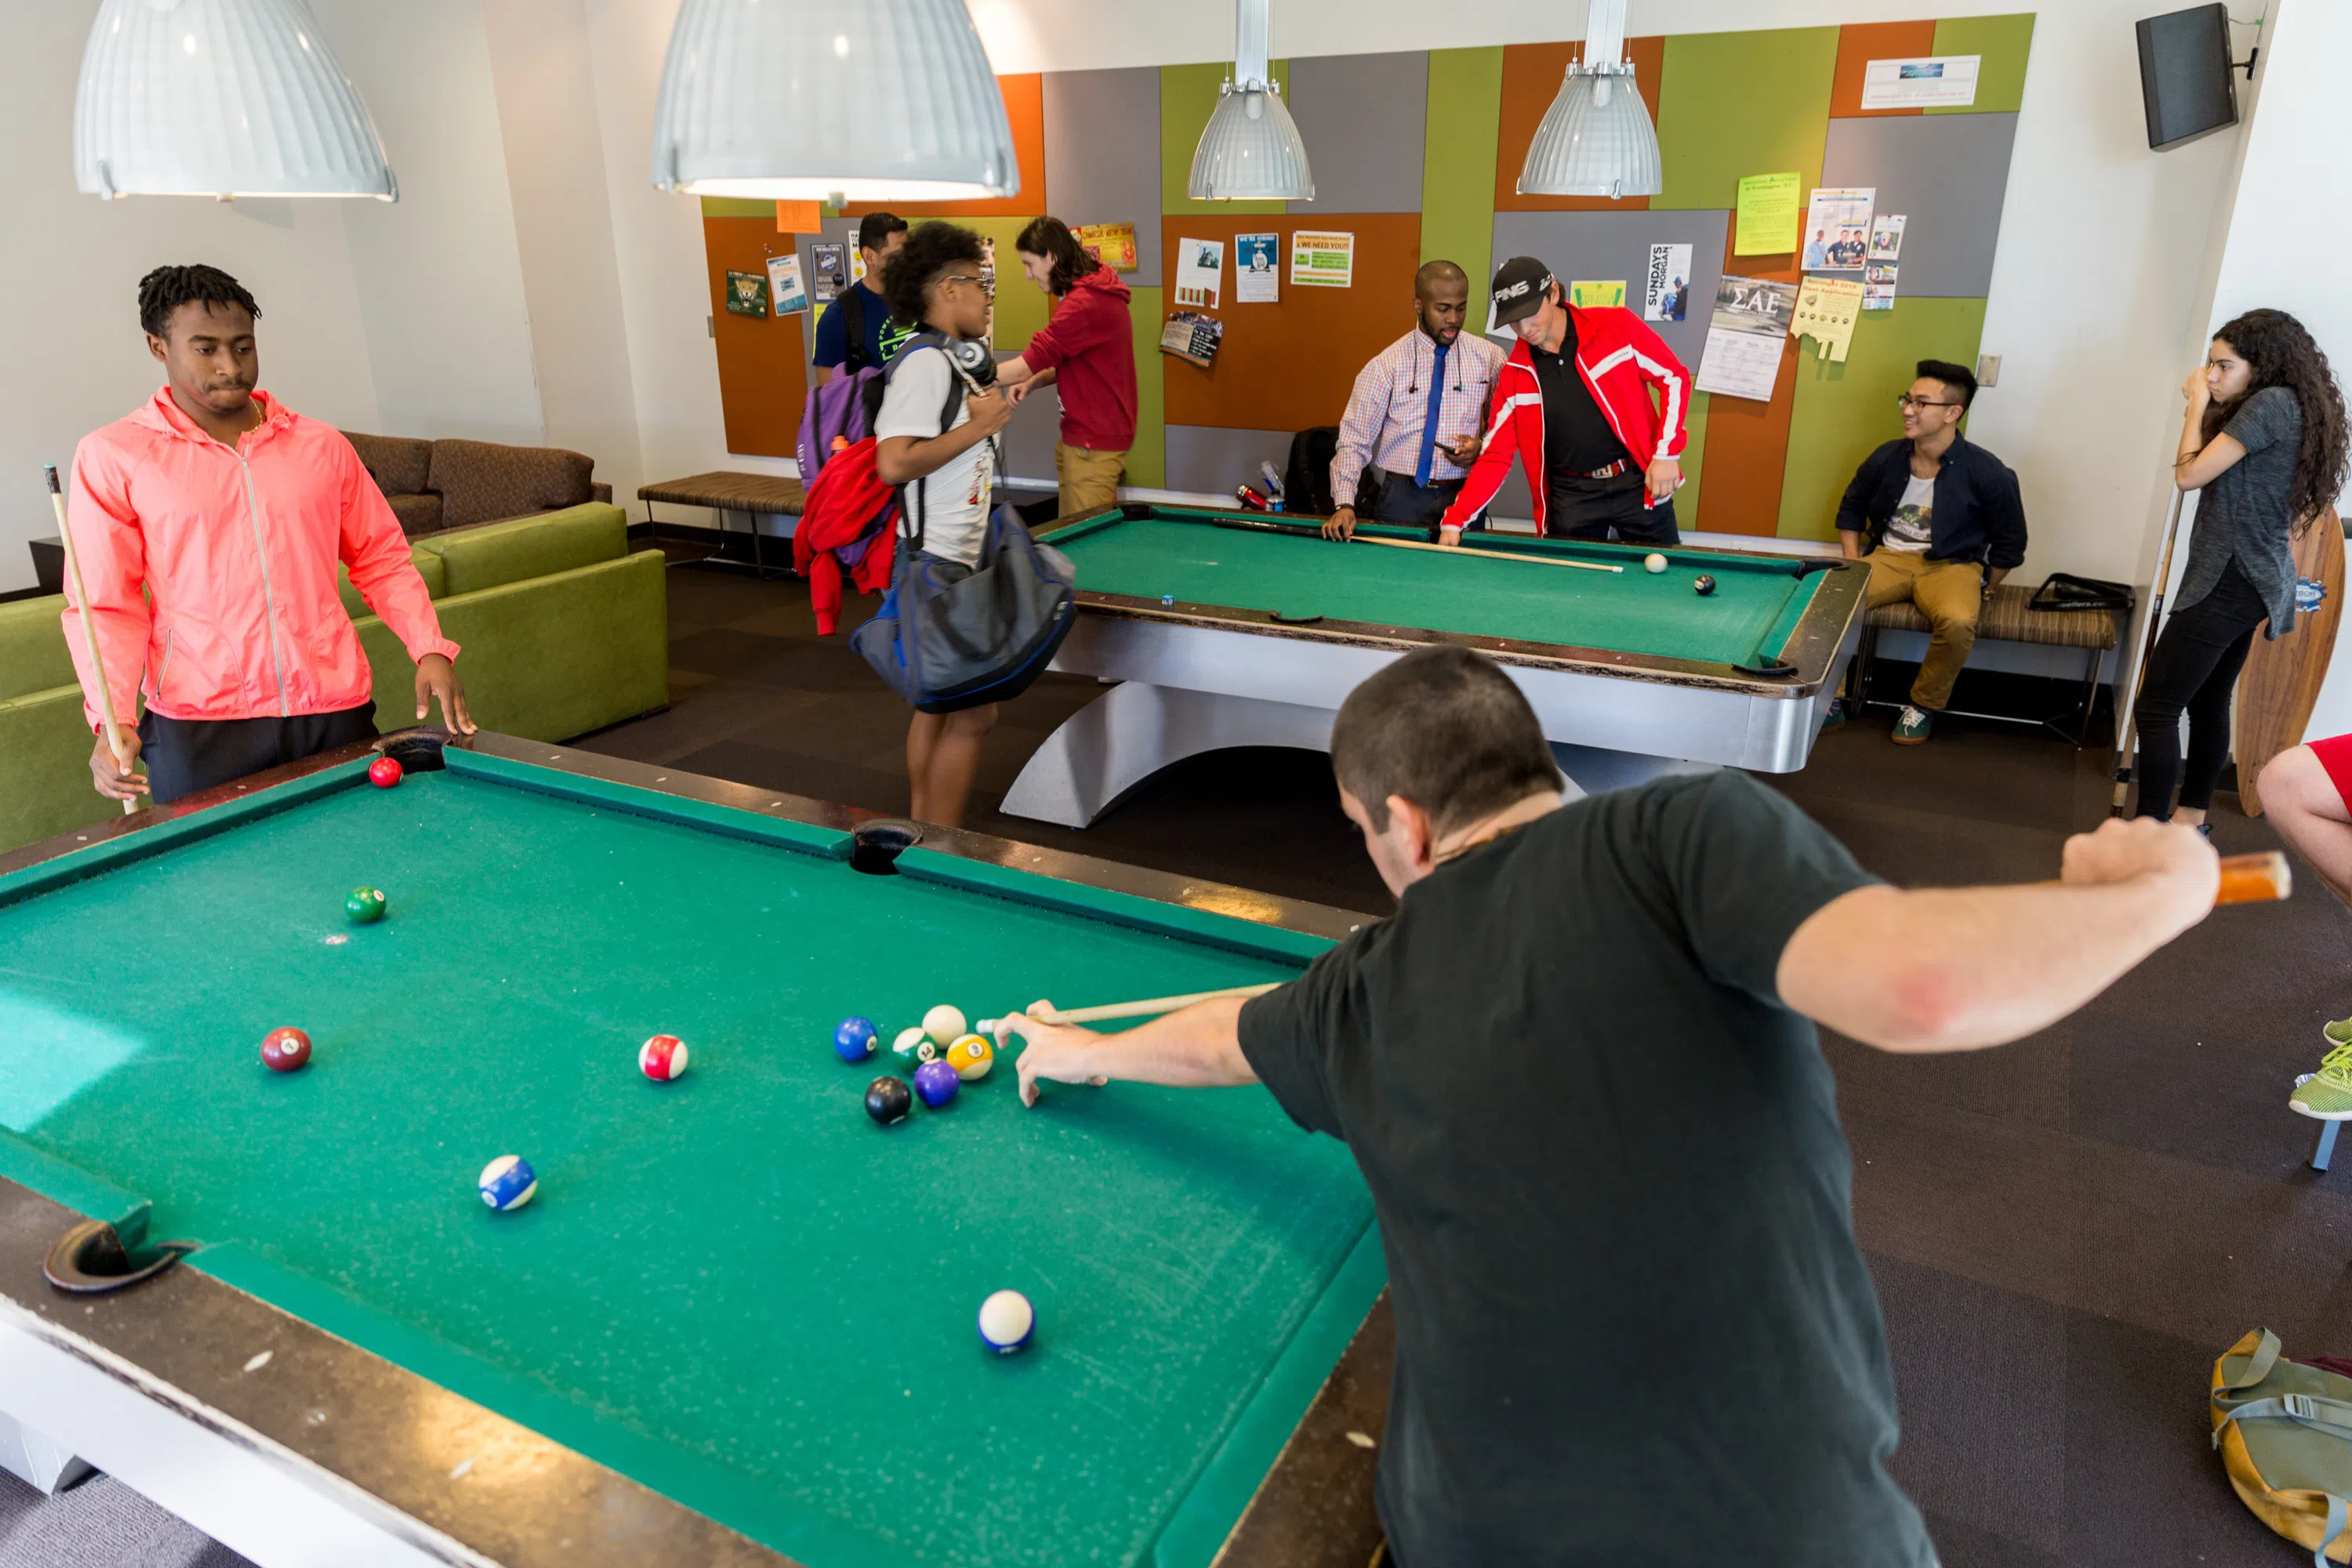 The Leo’s Den located in the Abraham Campus Center, is a lounge where students can play pool, board games and foosball, watch television, study or just relax.